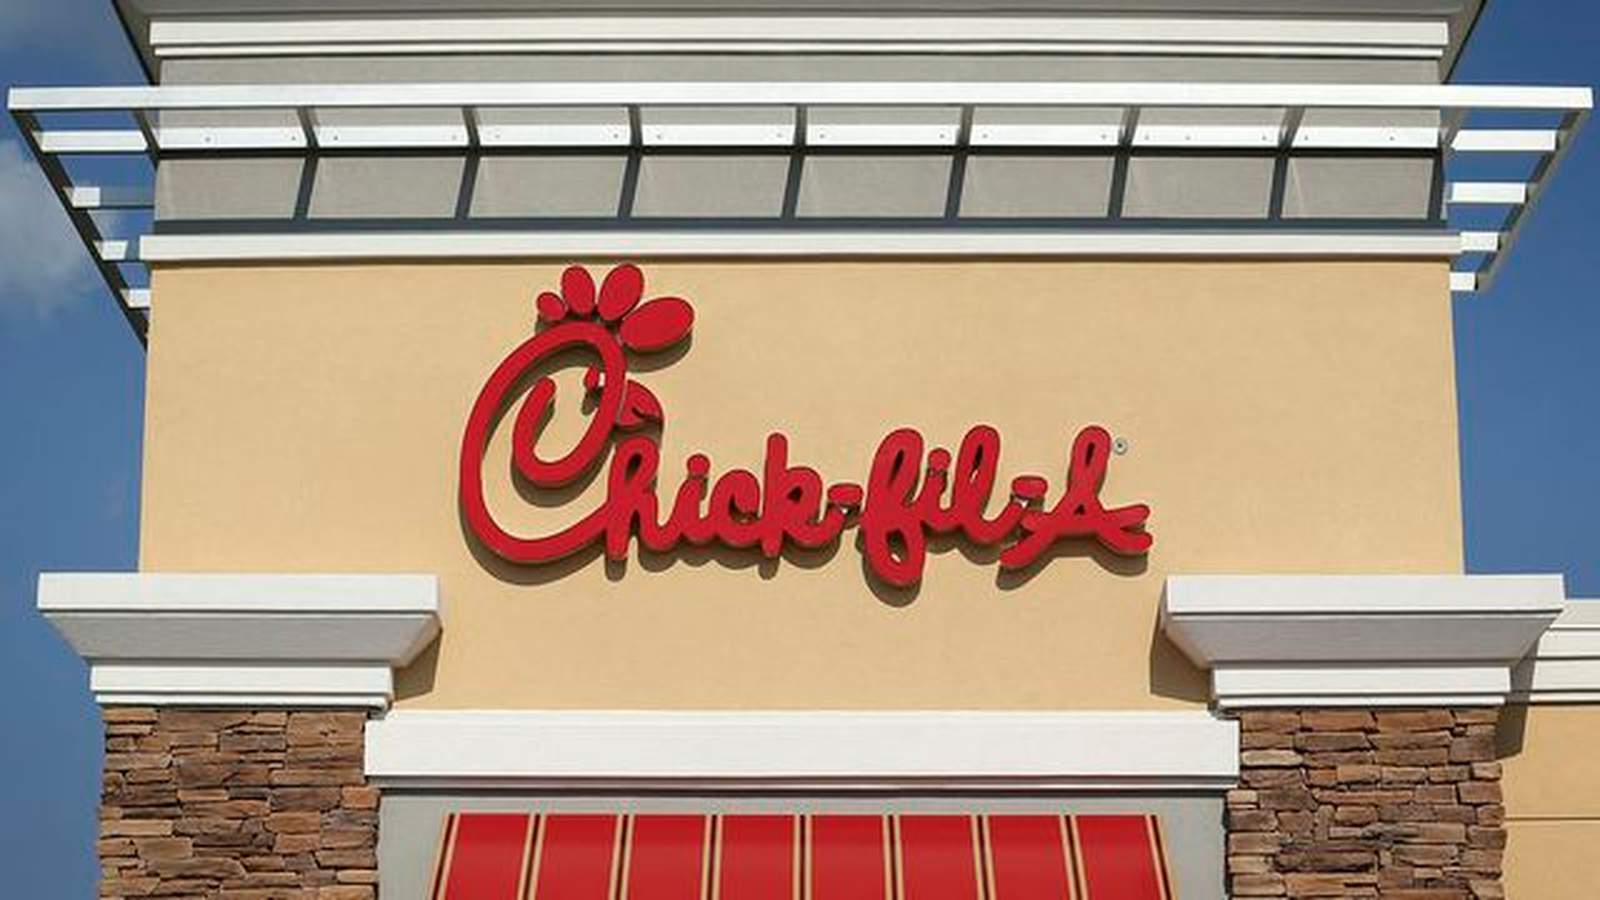 Man eats Chick-fil-A every day for 130 days -- except on Sundays